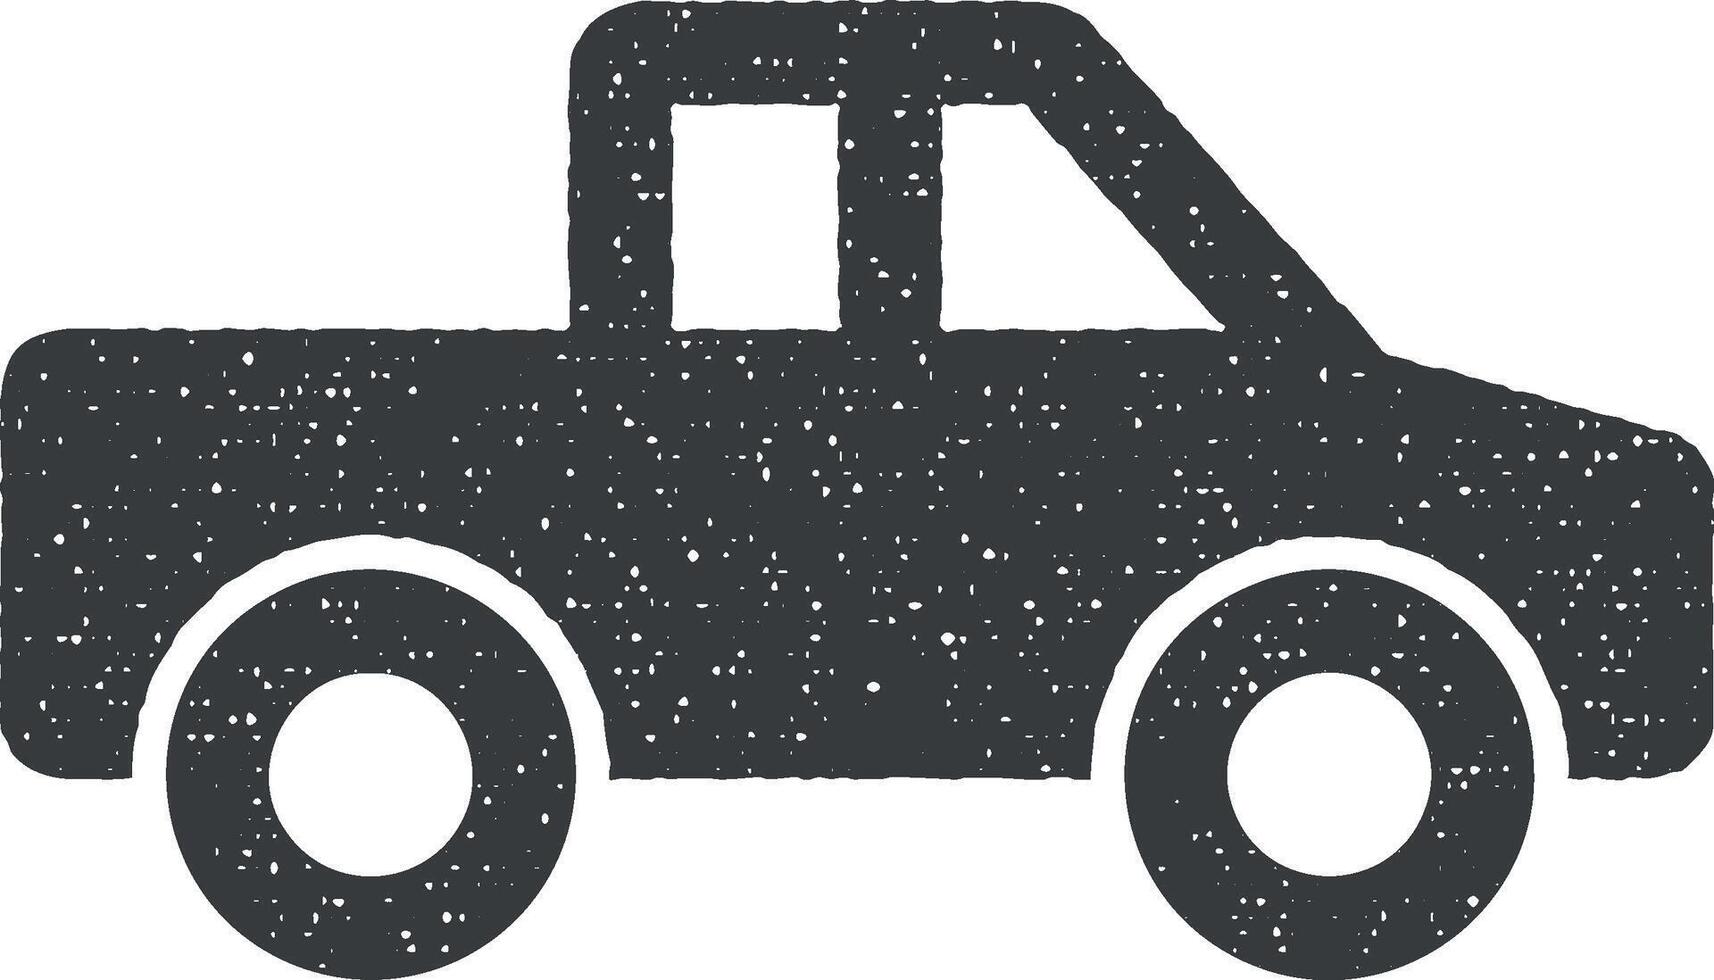 pickup vector icon illustration with stamp effect